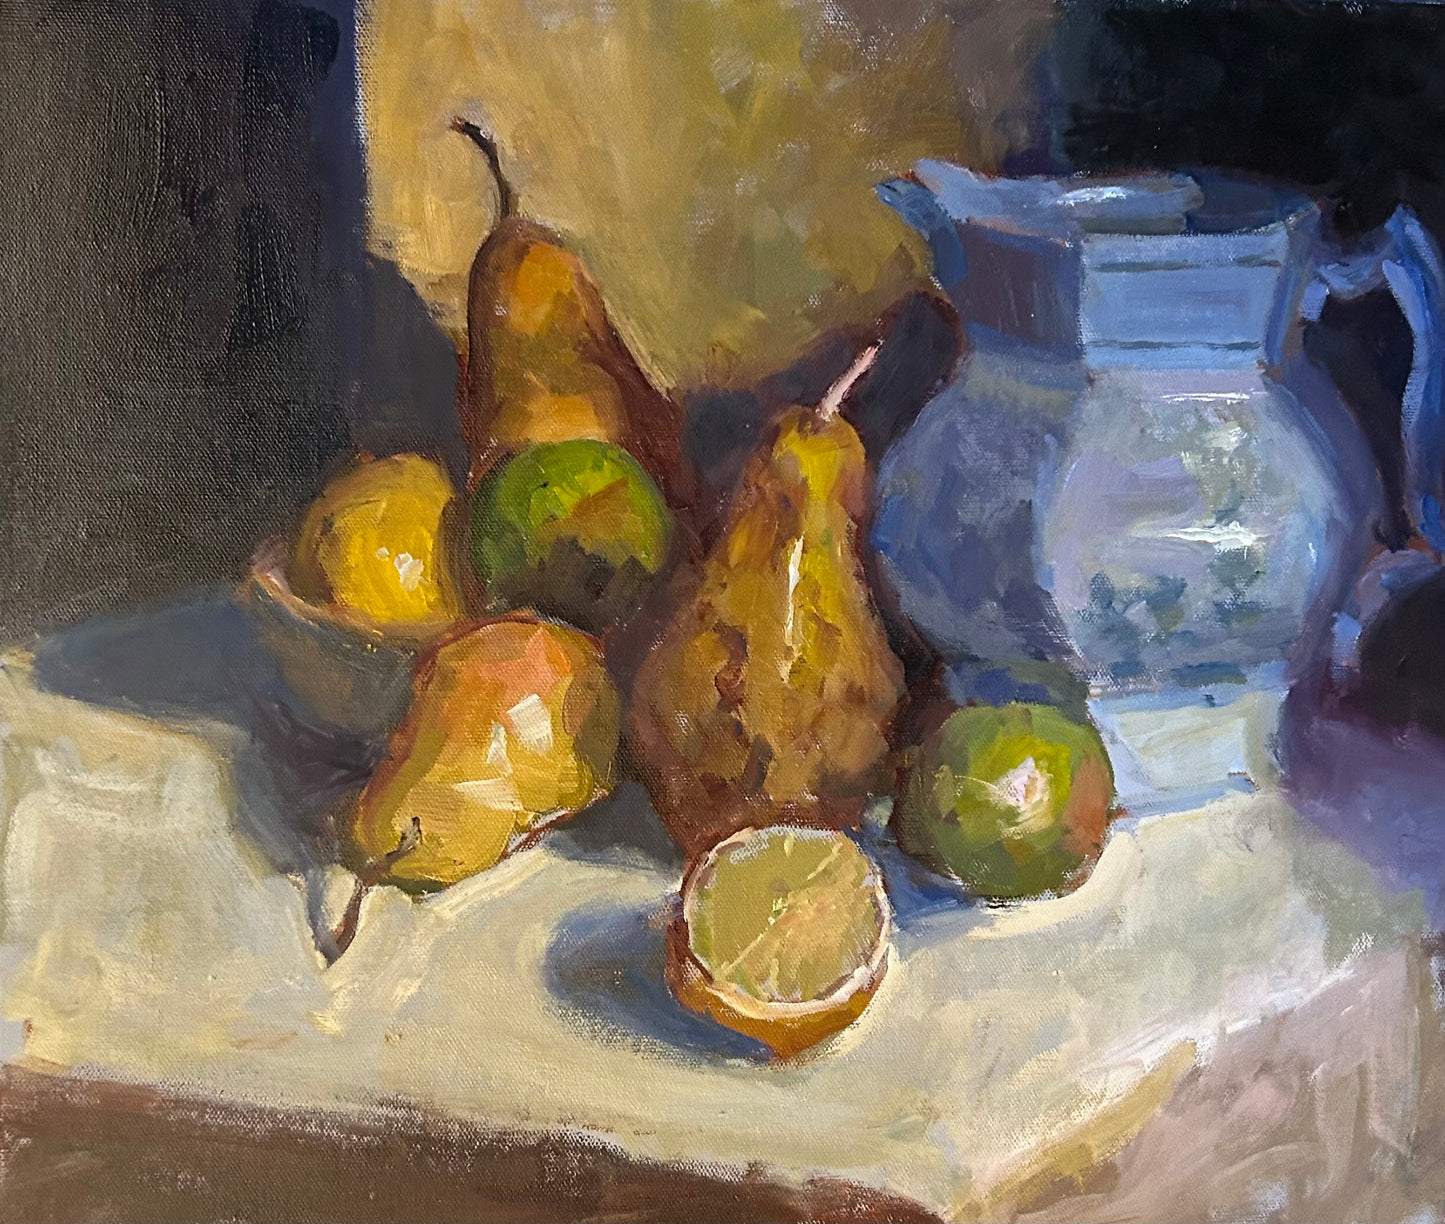 Pitcher and Pears (16 x 20 Inches)